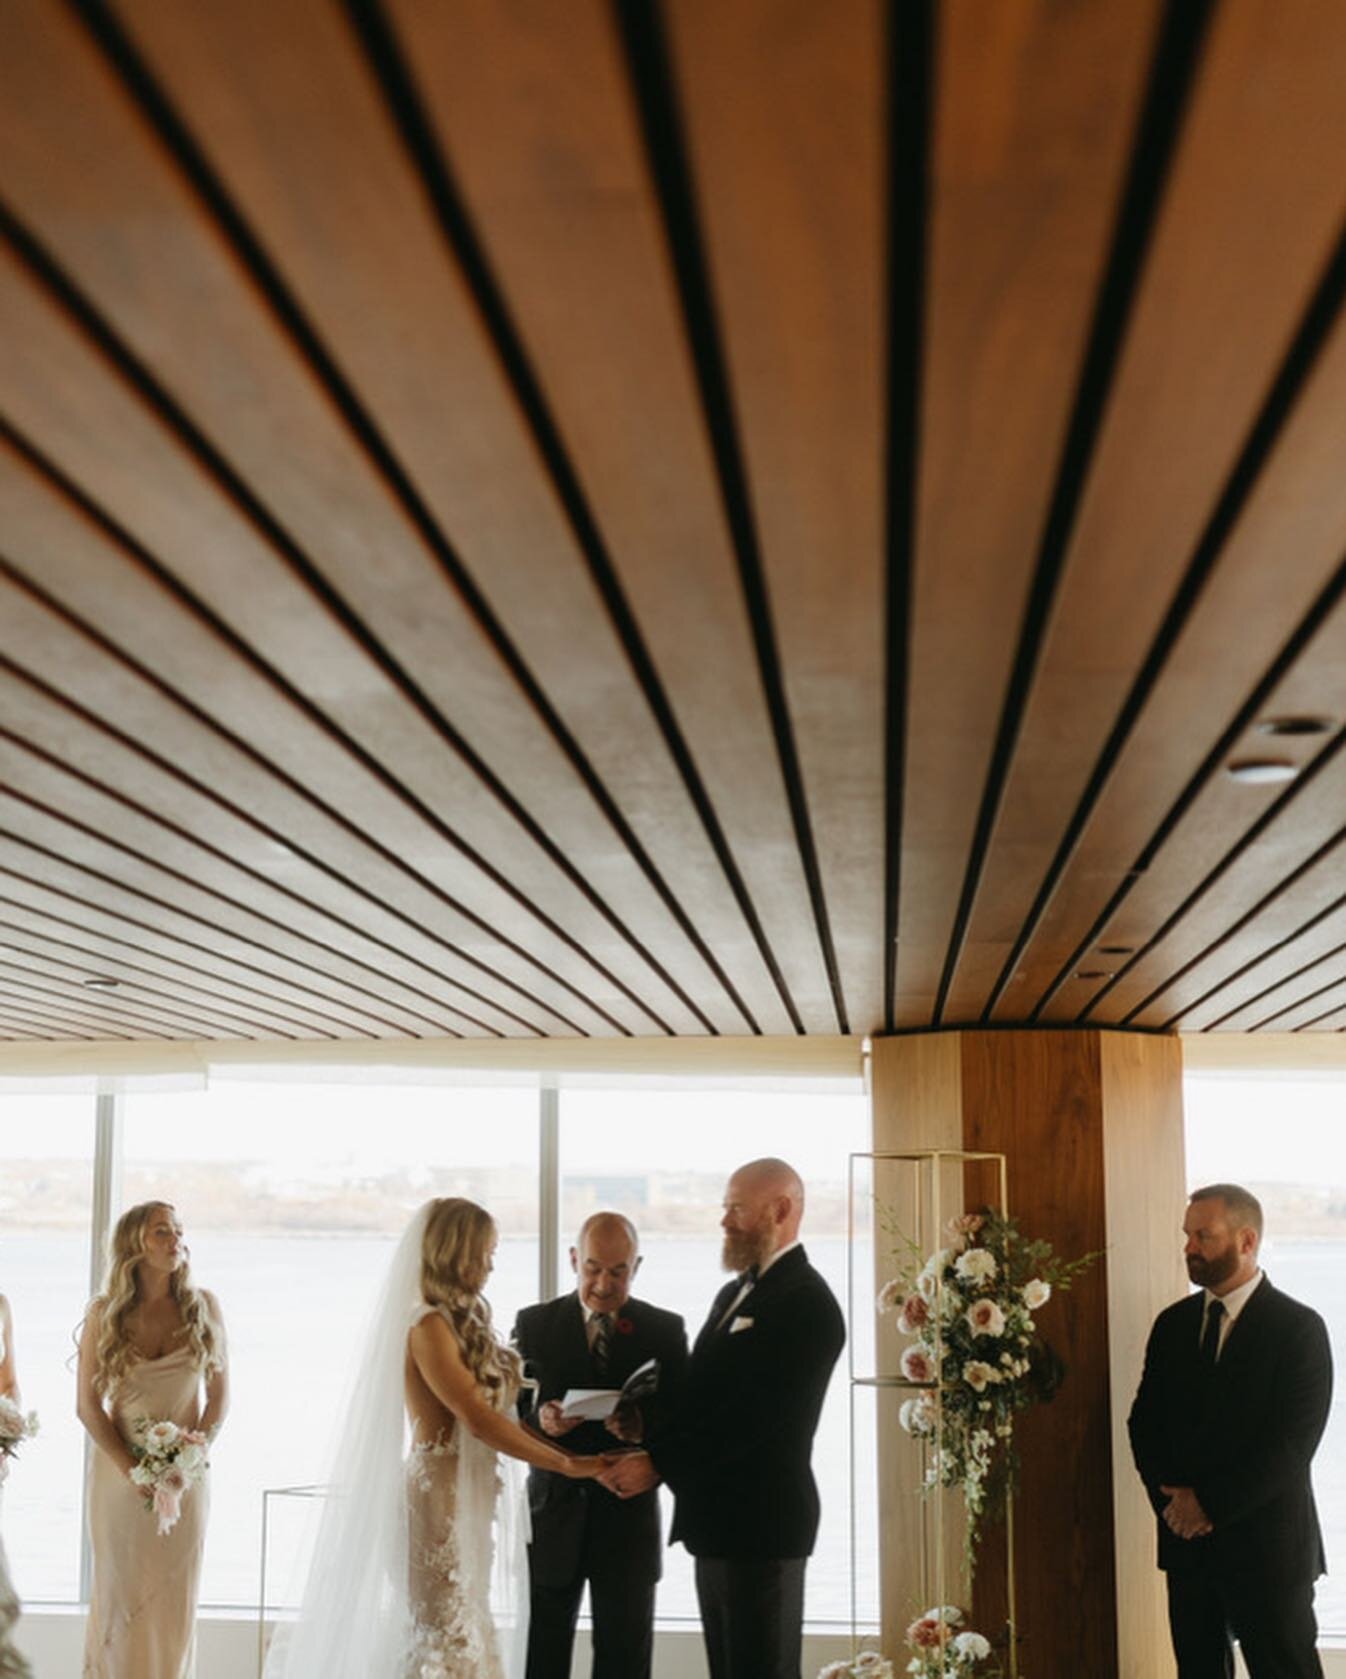 Alyssa &amp; Andrew's Ceremony was definitely one for the books! It took place in The Watch Room at the Muir Hotel, where guests had 270 degrees of unobstructed views of the Halifax Harbour. Just spectacular!
⠀⠀⠀⠀⠀⠀⠀⠀⠀
Day-of Coordinator: @weddinggat